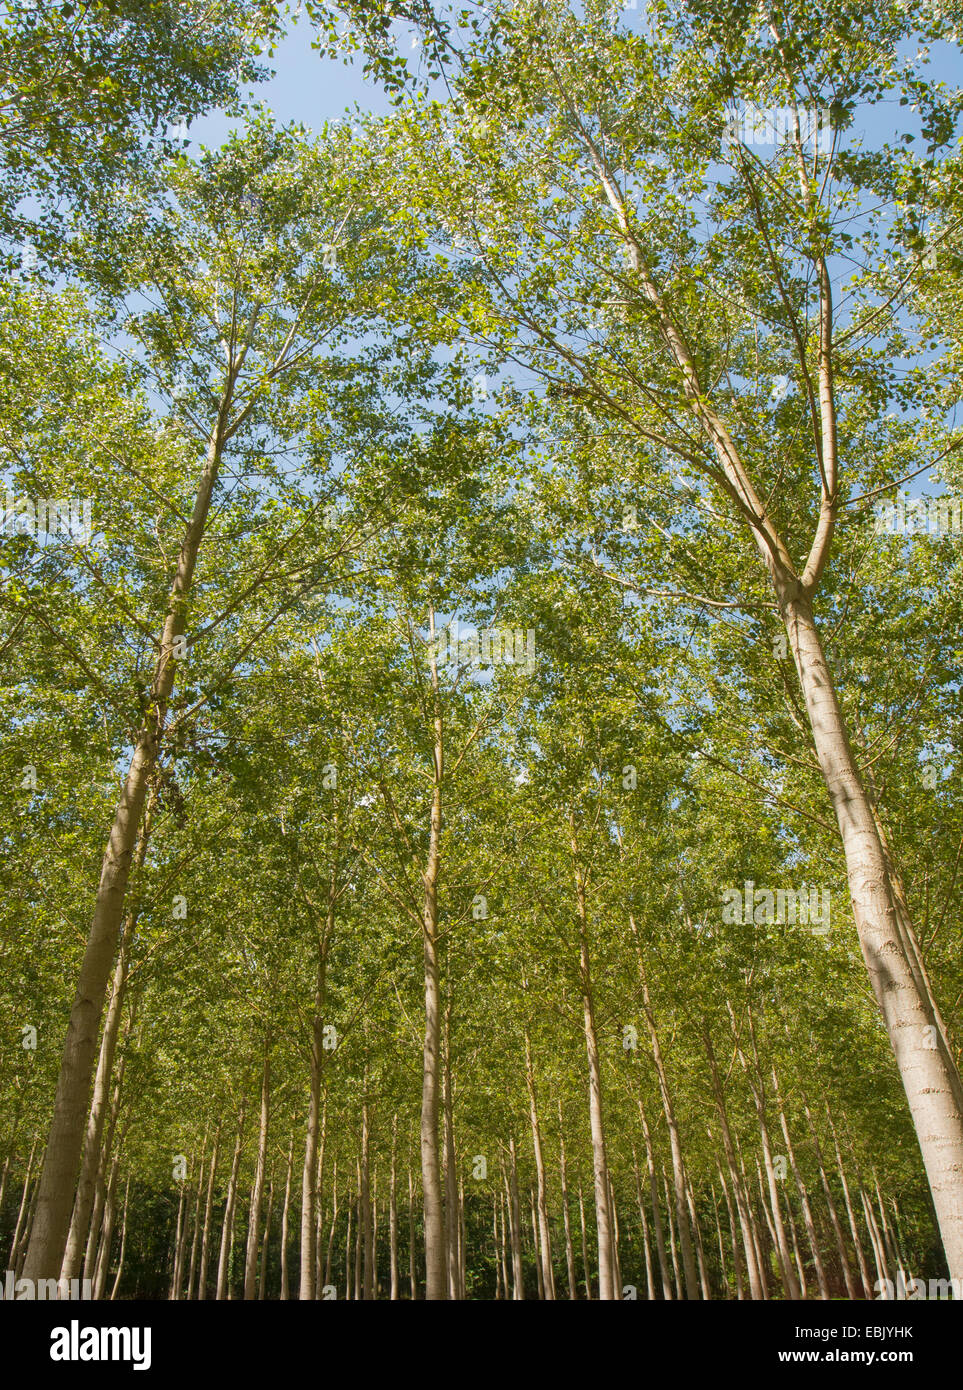 Low angle view of trees in forest Stock Photo